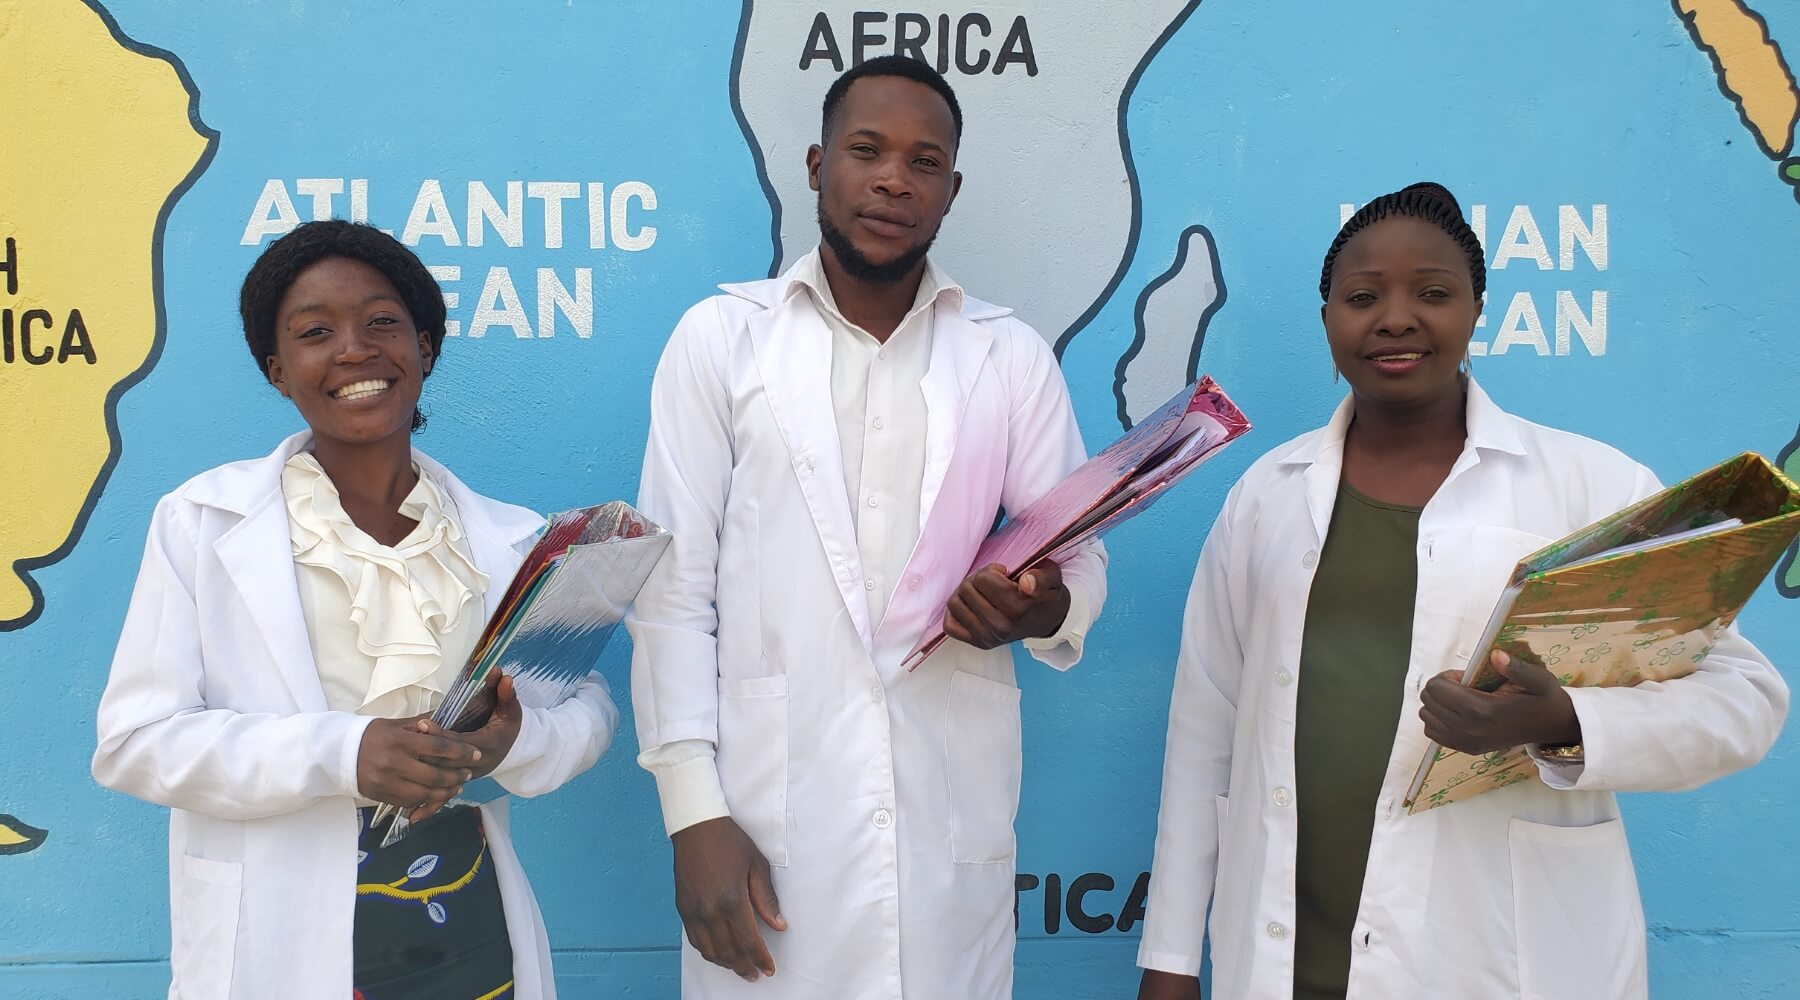 Three young adults wearing lab coats, holding binders and smiling at the camera